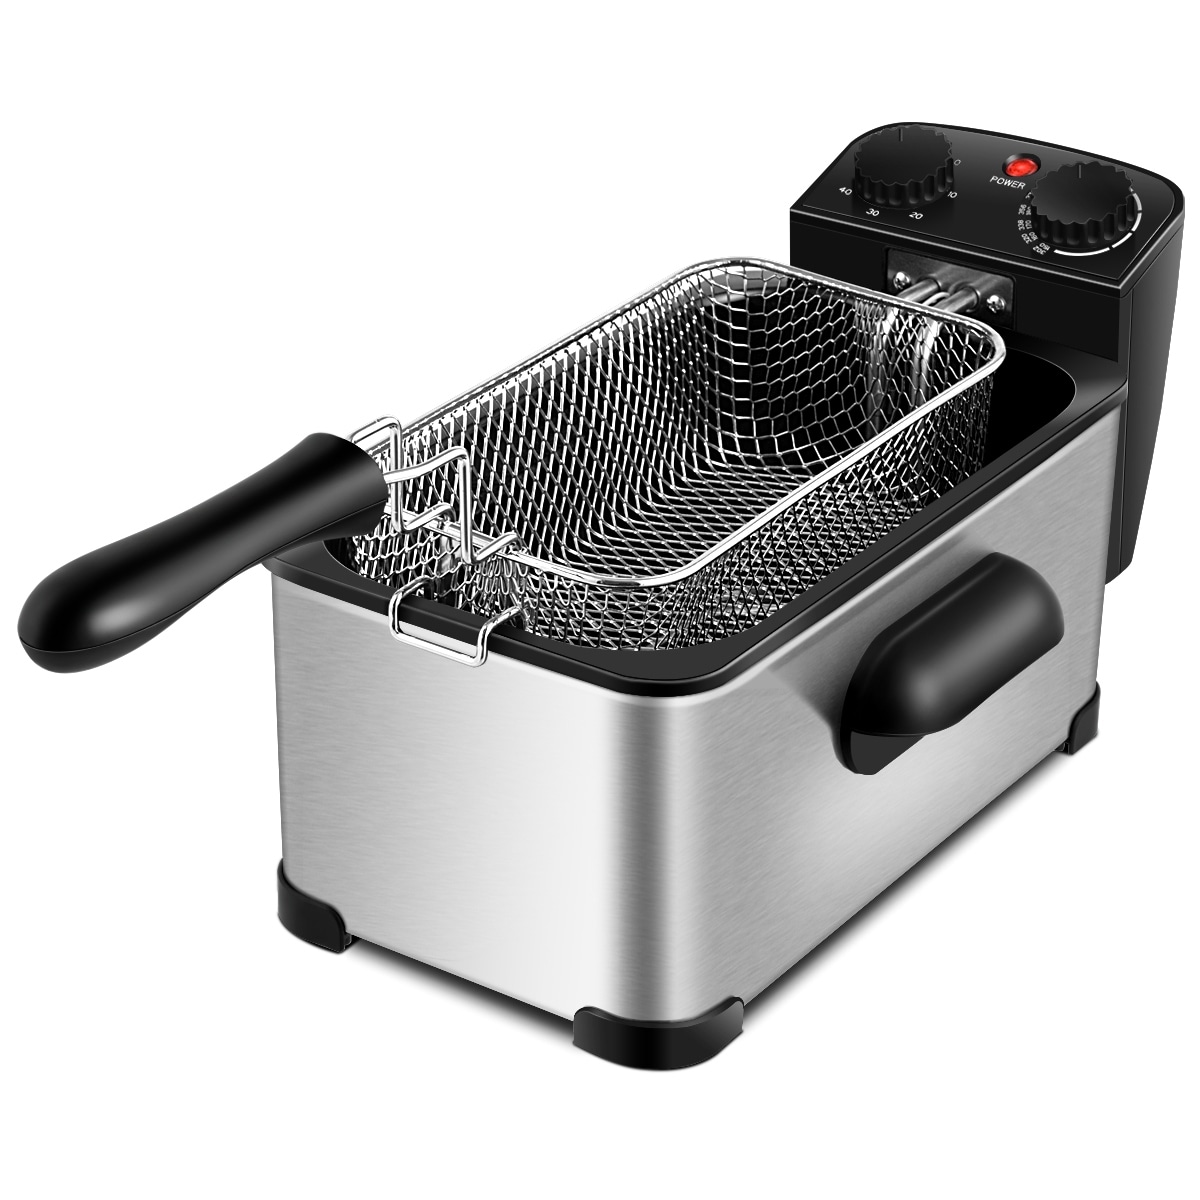 https://ak1.ostkcdn.com/images/products/is/images/direct/1ef9f830080ef4c62f882a84025bb99bcbe1b875/Costway-3.2-Quart-Electric-Deep-Fryer-1700W-Stainless-Steel-Timer.jpg